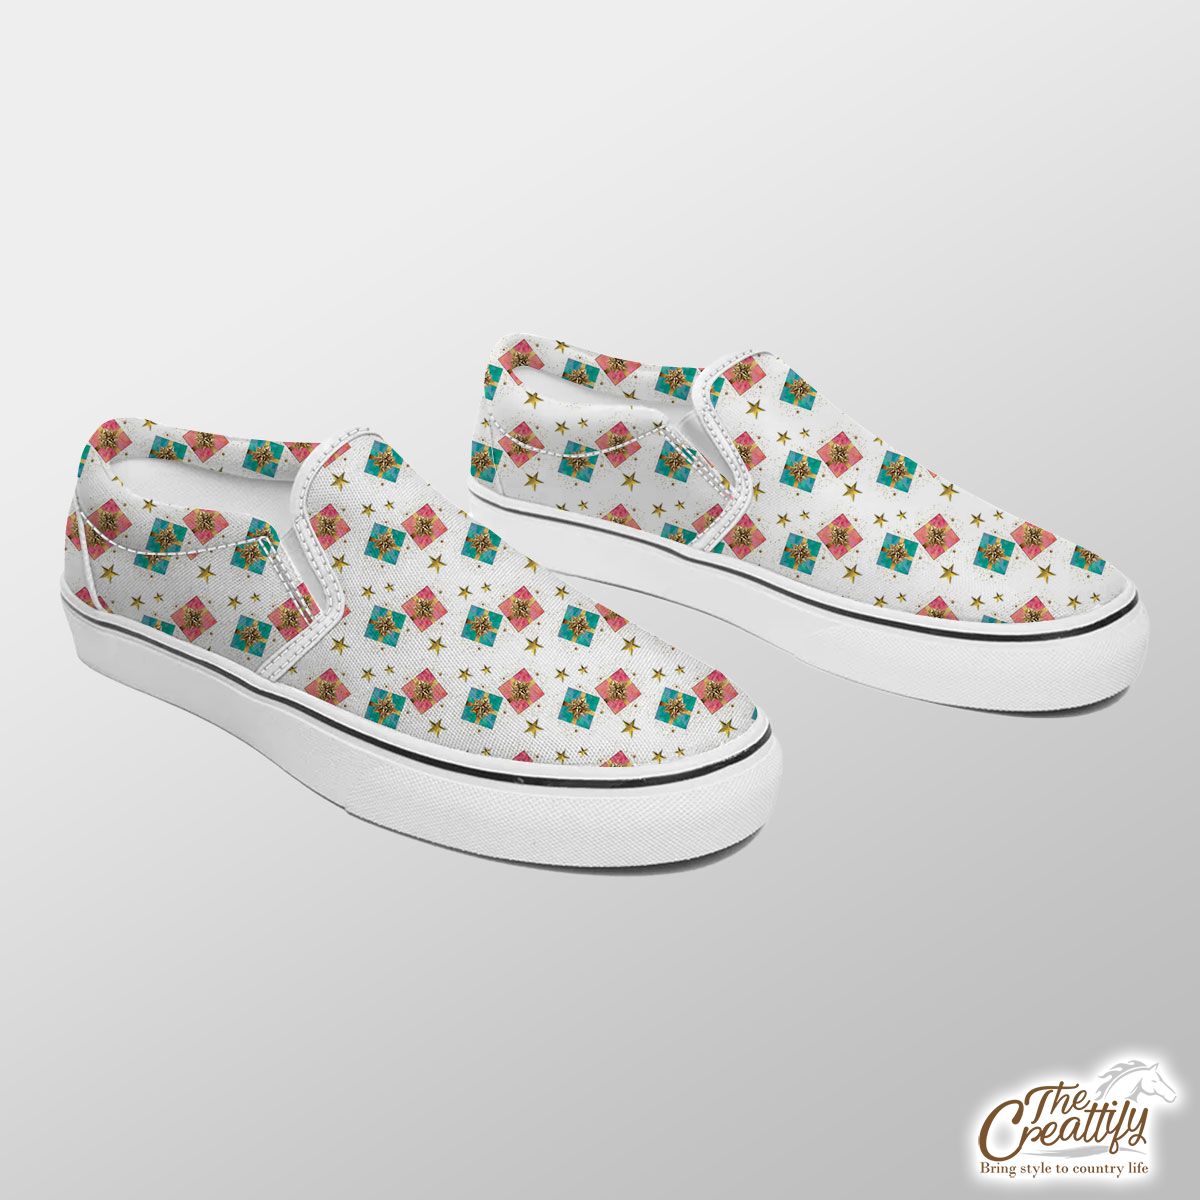 Christmas Gifts, Christmas Present Ideas, Christmas Pattern Slip On Sneakers